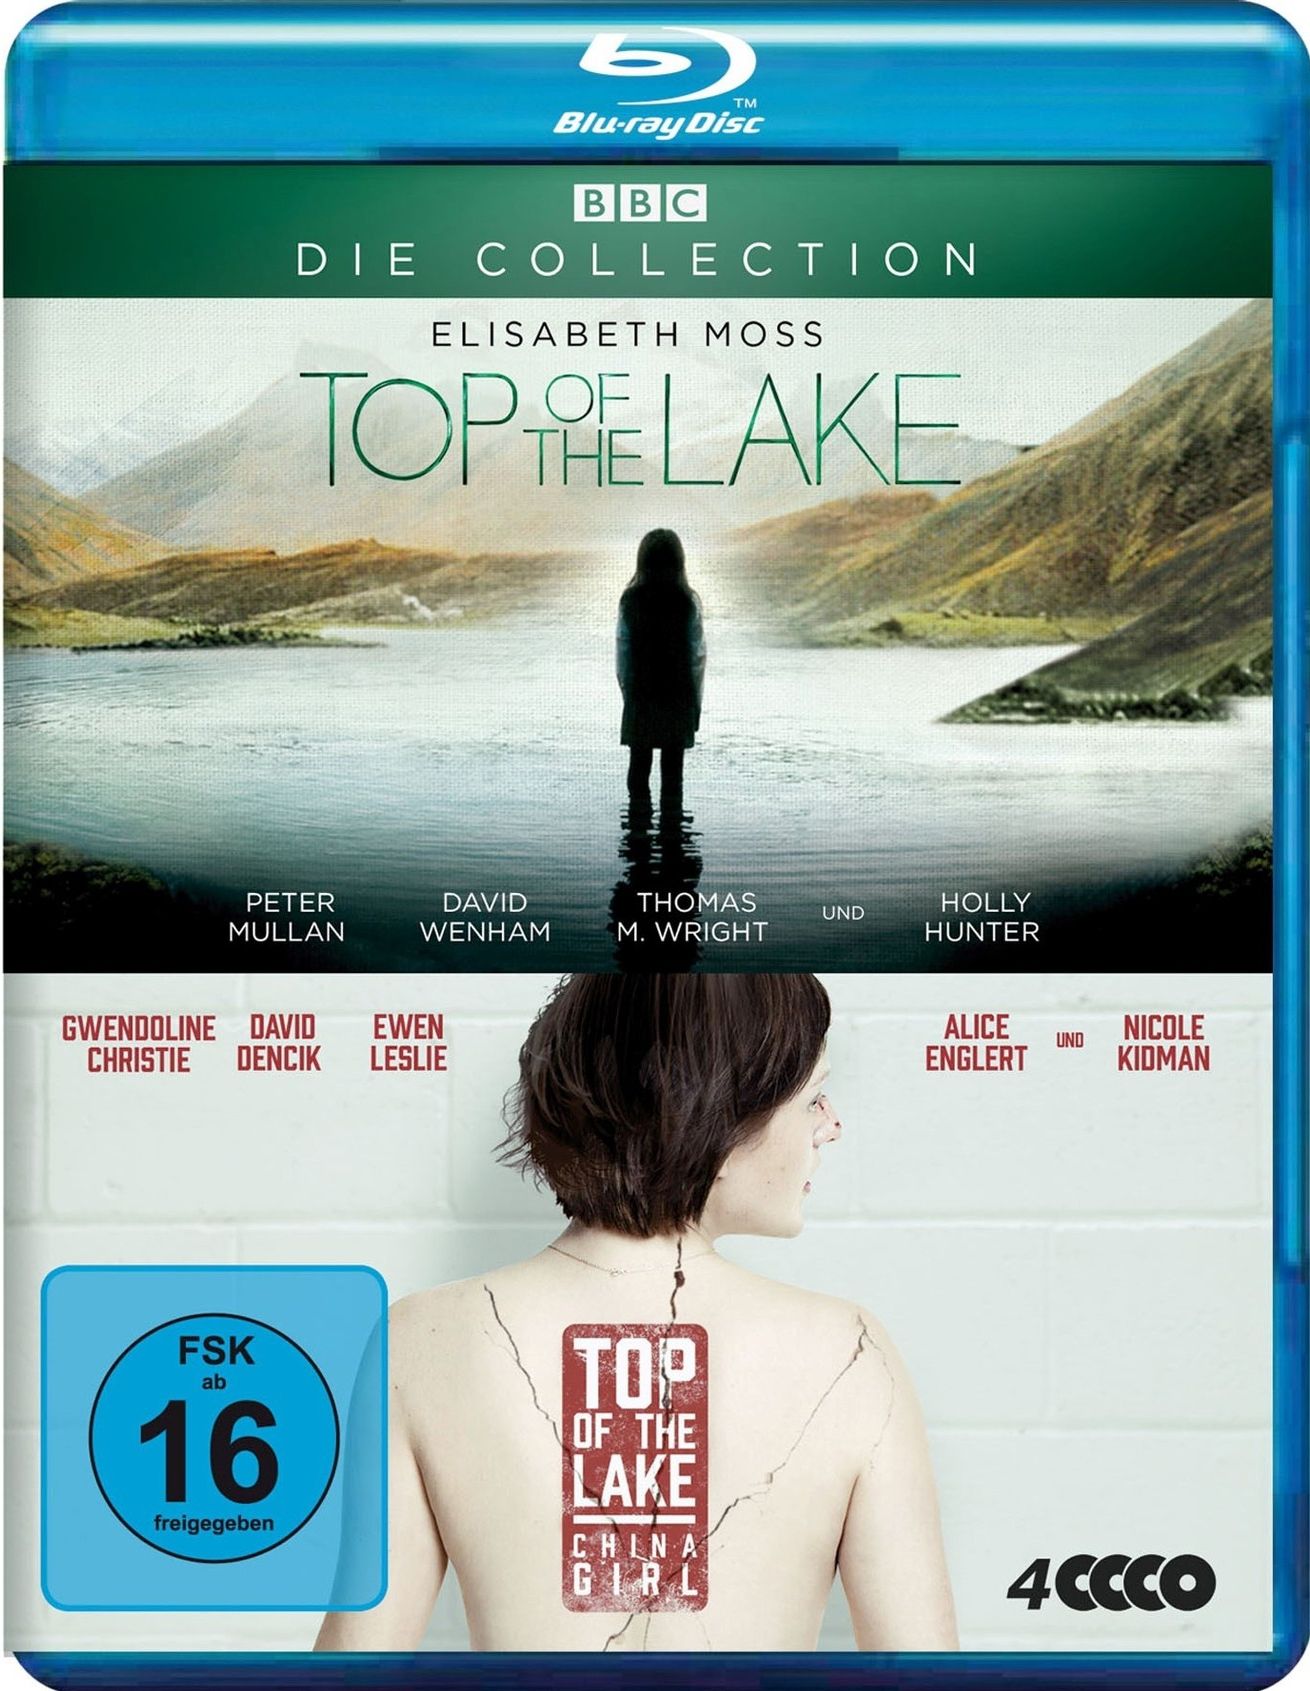 Top of the Lake - Die Collection (4 Discs) (BLURAY)